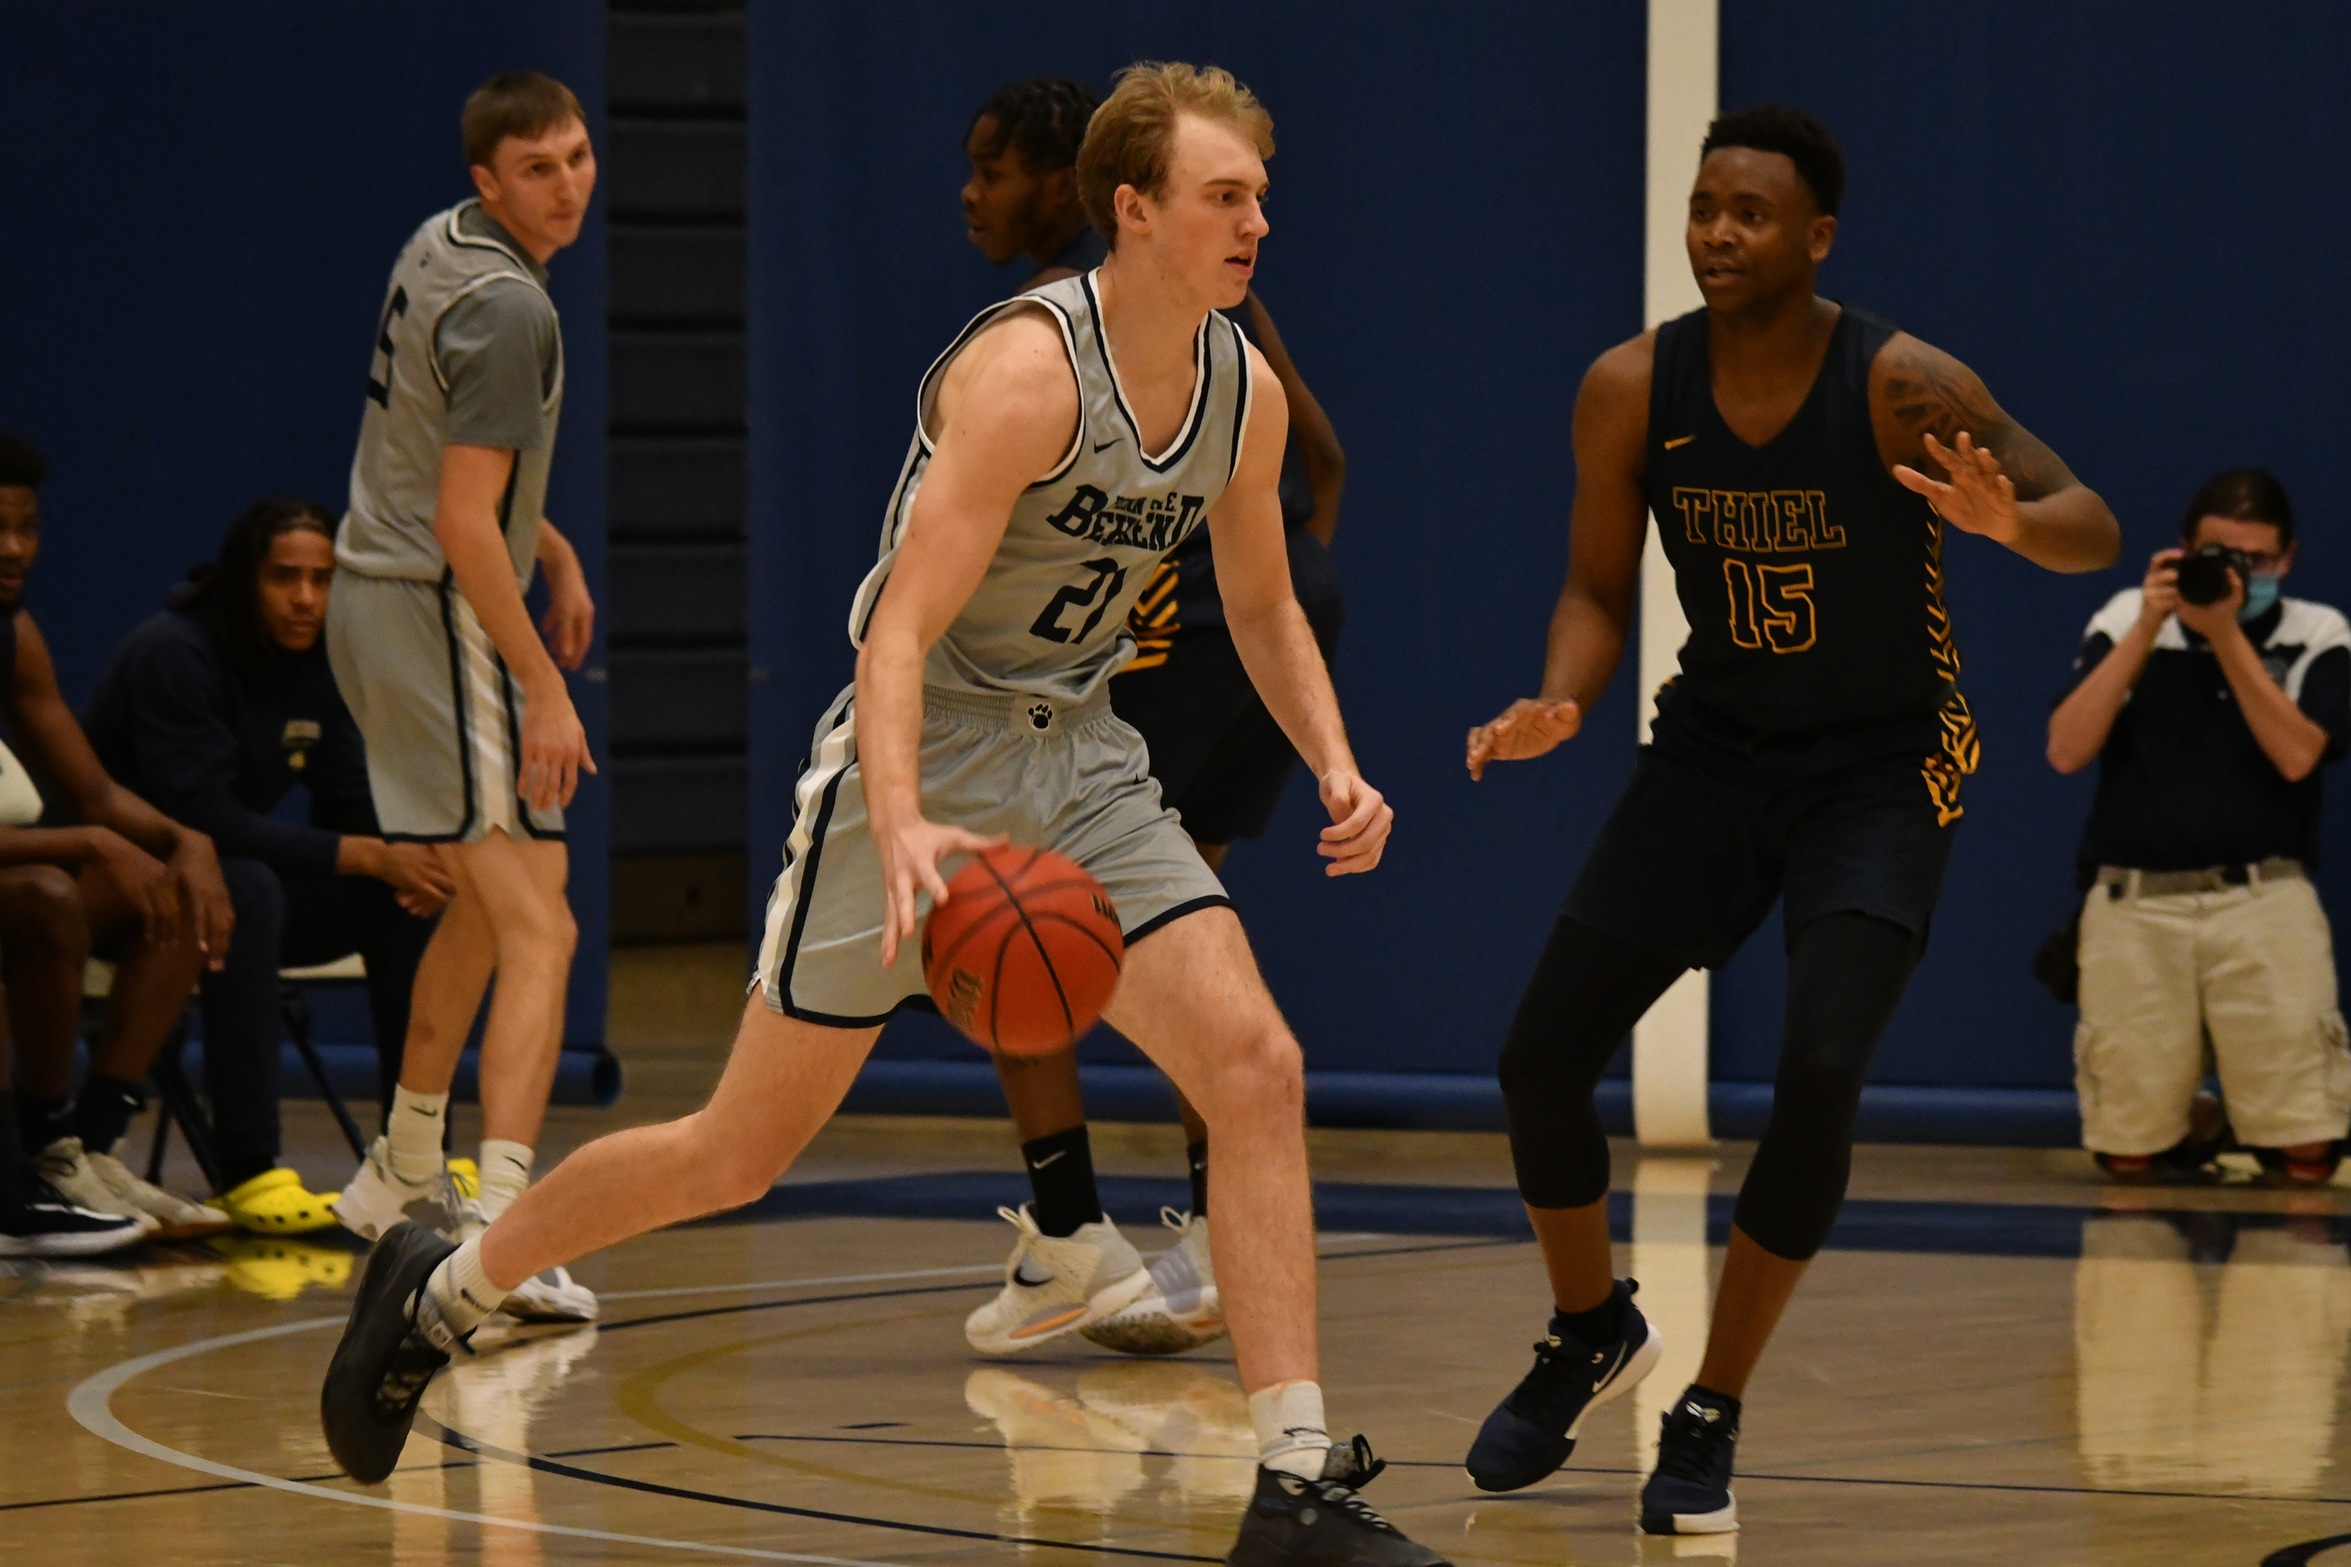 Men's Basketball Takes Loss in Non-Conference Game Against Cleveland St.